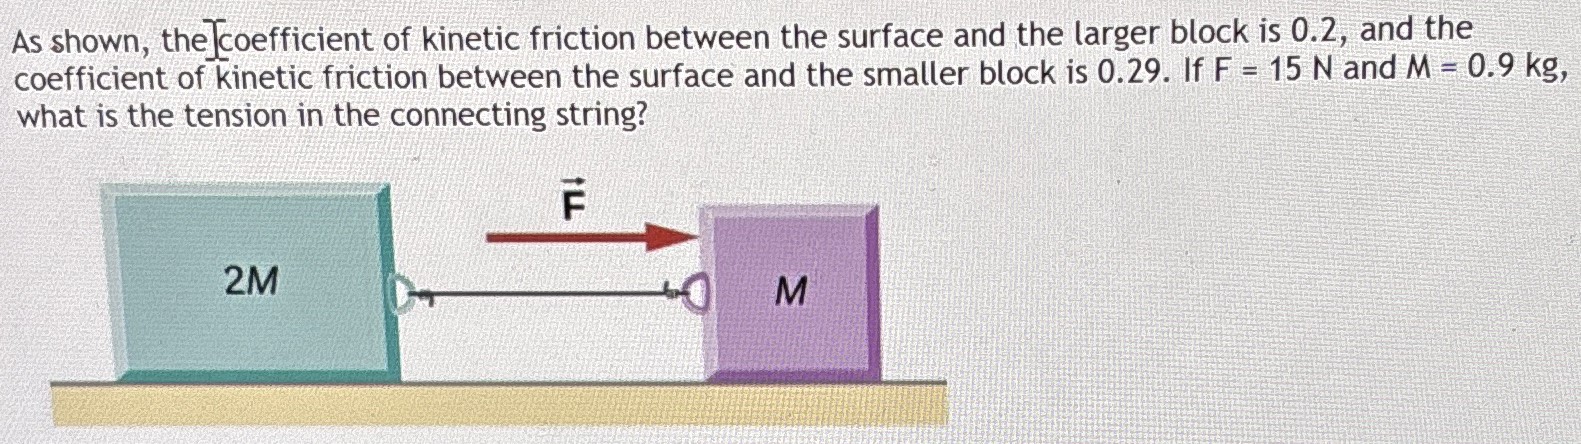 As shown, the ]coefficient of kinetic friction between the surface and the larger block is 0.2, and the coefficient of kinetic friction between the surface and the smaller block is 0.29. If F = 15 N and M = 0.9 kg, what is the tension in the connecting string?